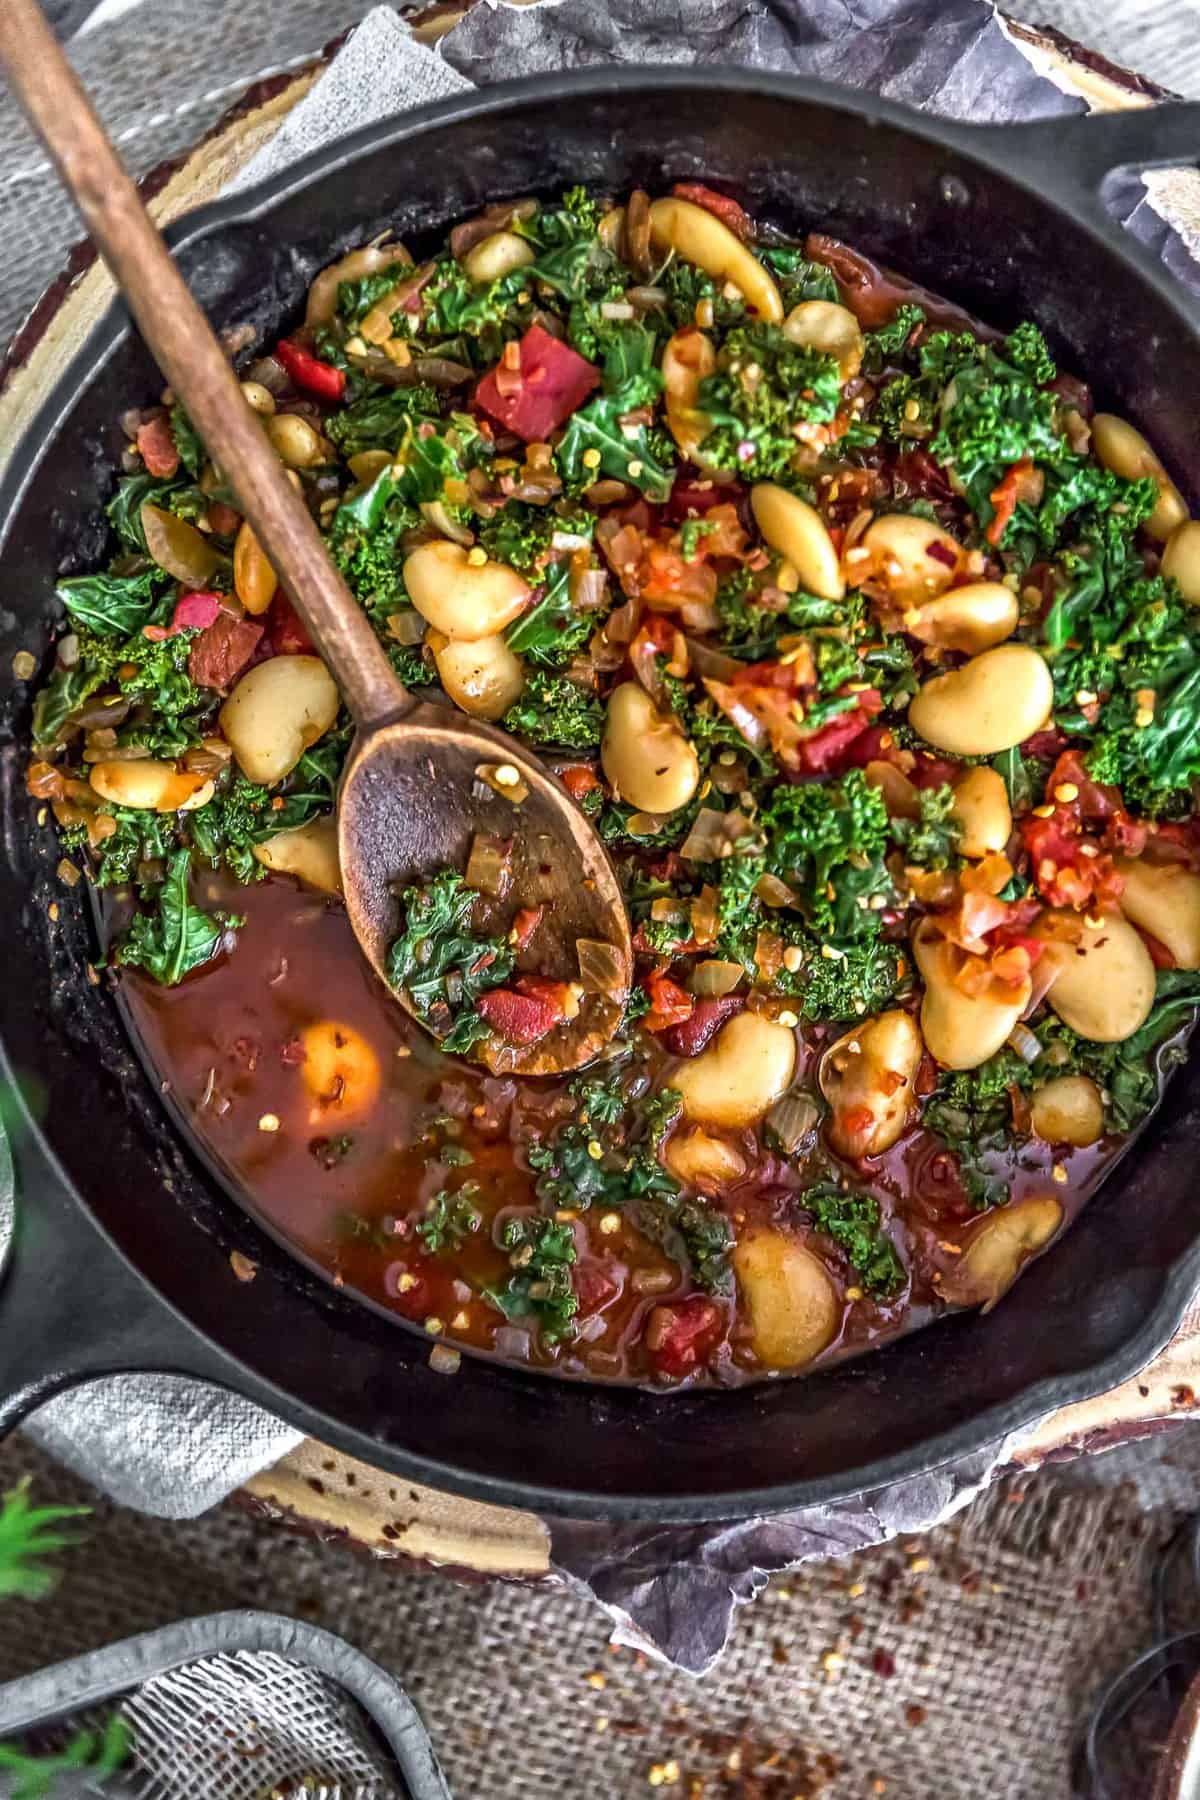 Dish of Southern Kale and Butter Beans